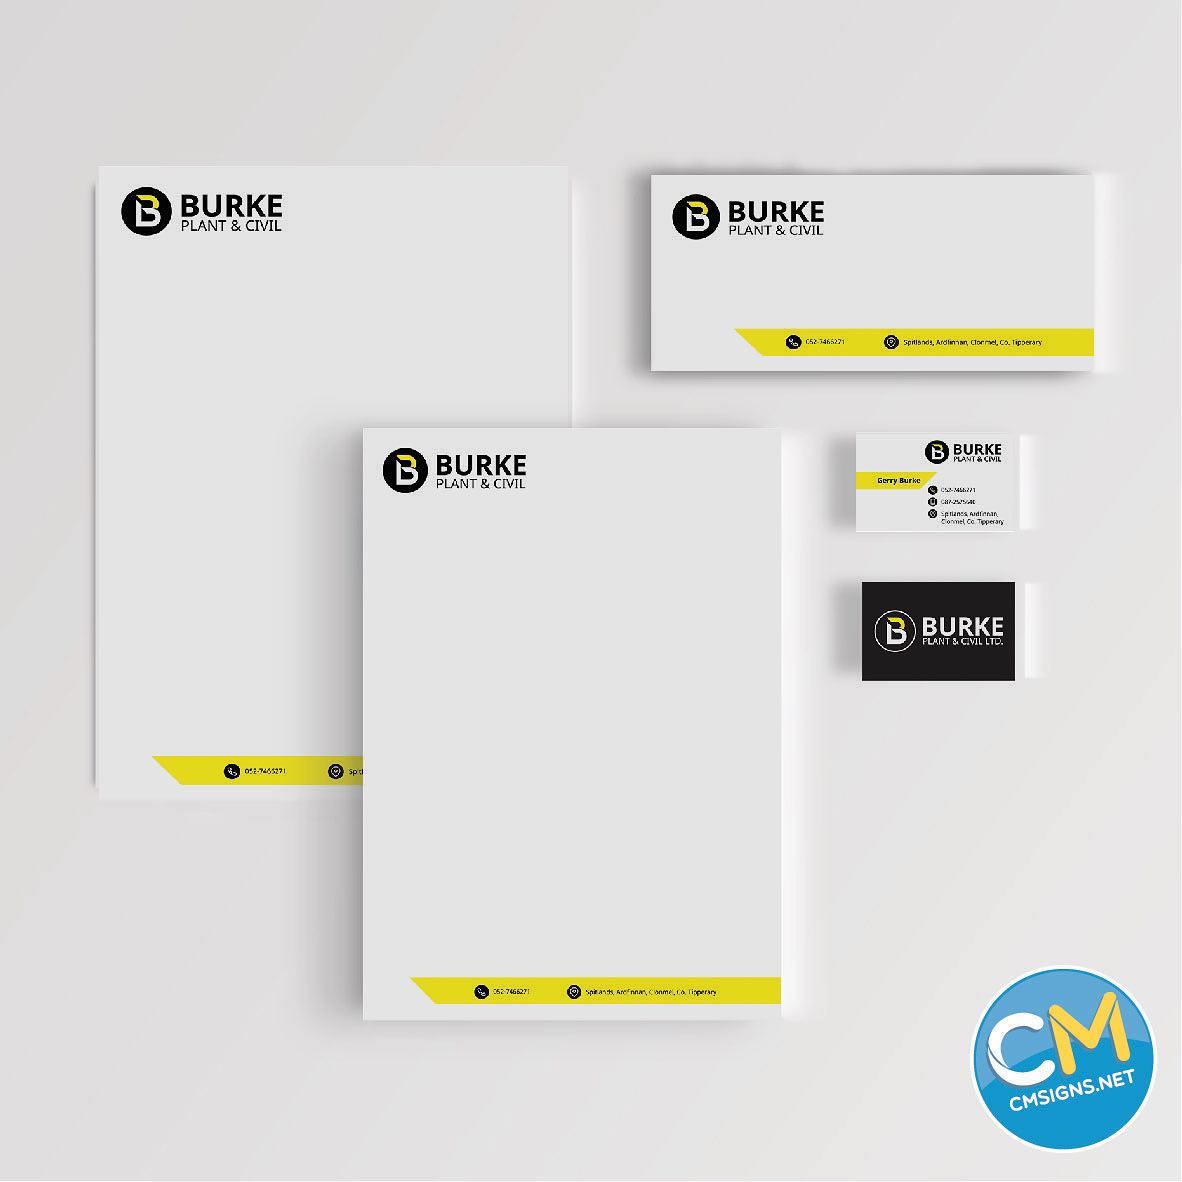 Complete set of office stationery